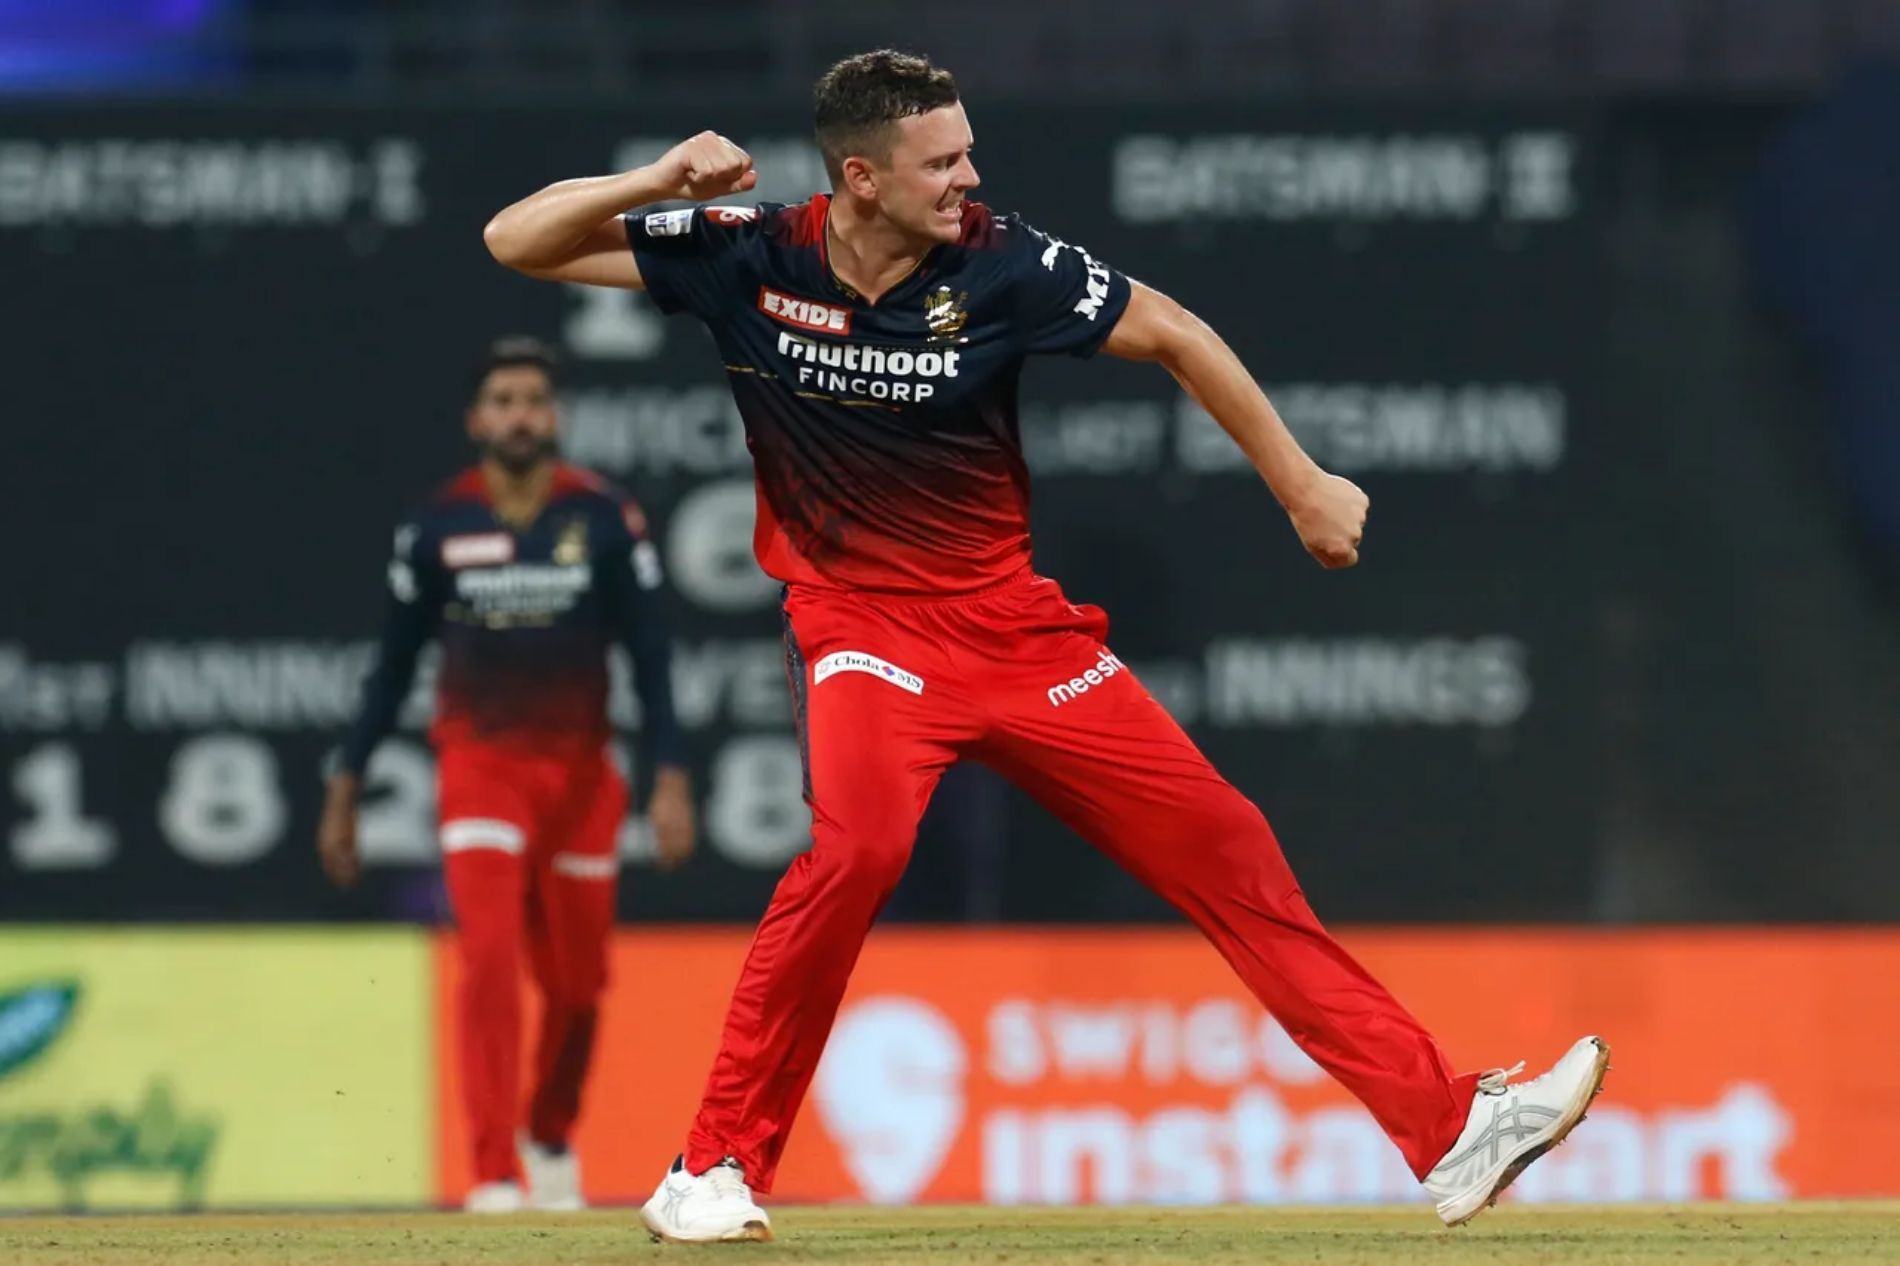 Josh Hazlewood is expected to lead the Royal Challengers Bangalore pace attack.